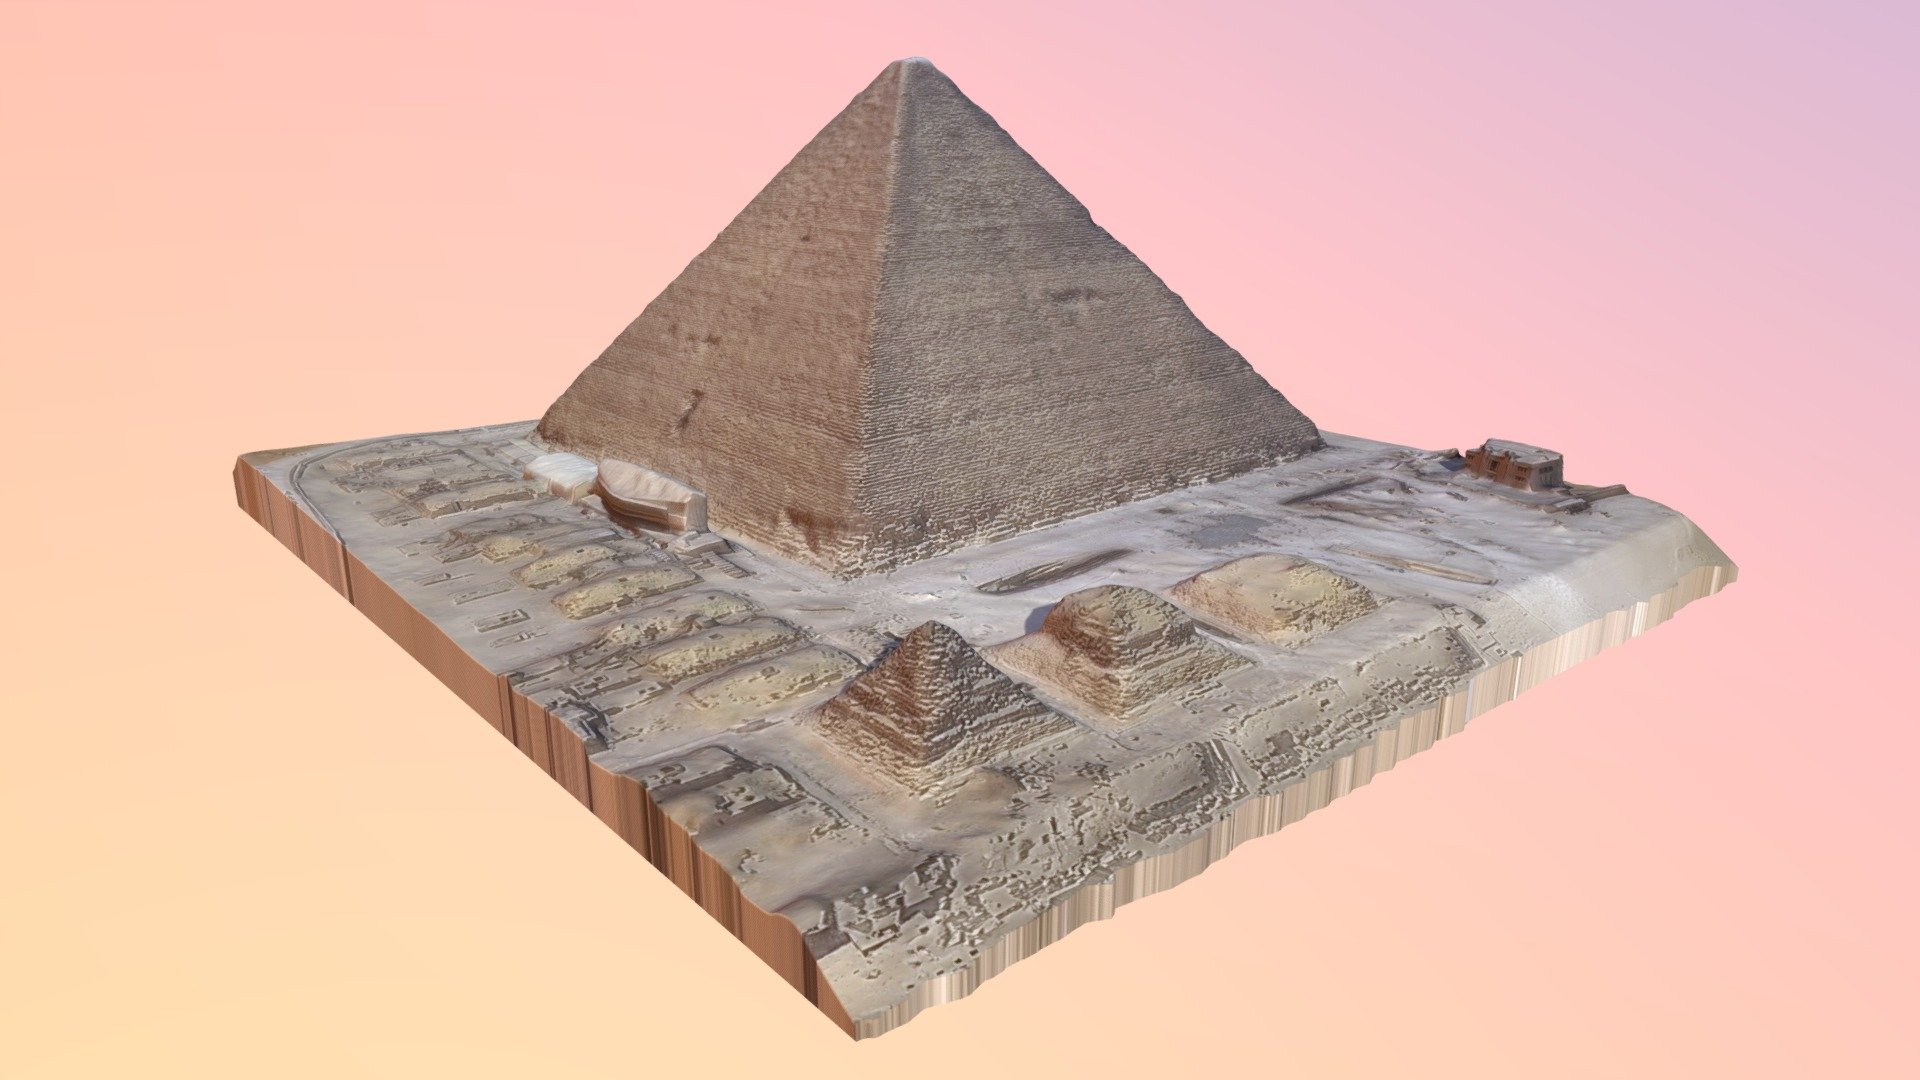 great pyramid of giza 3d tour